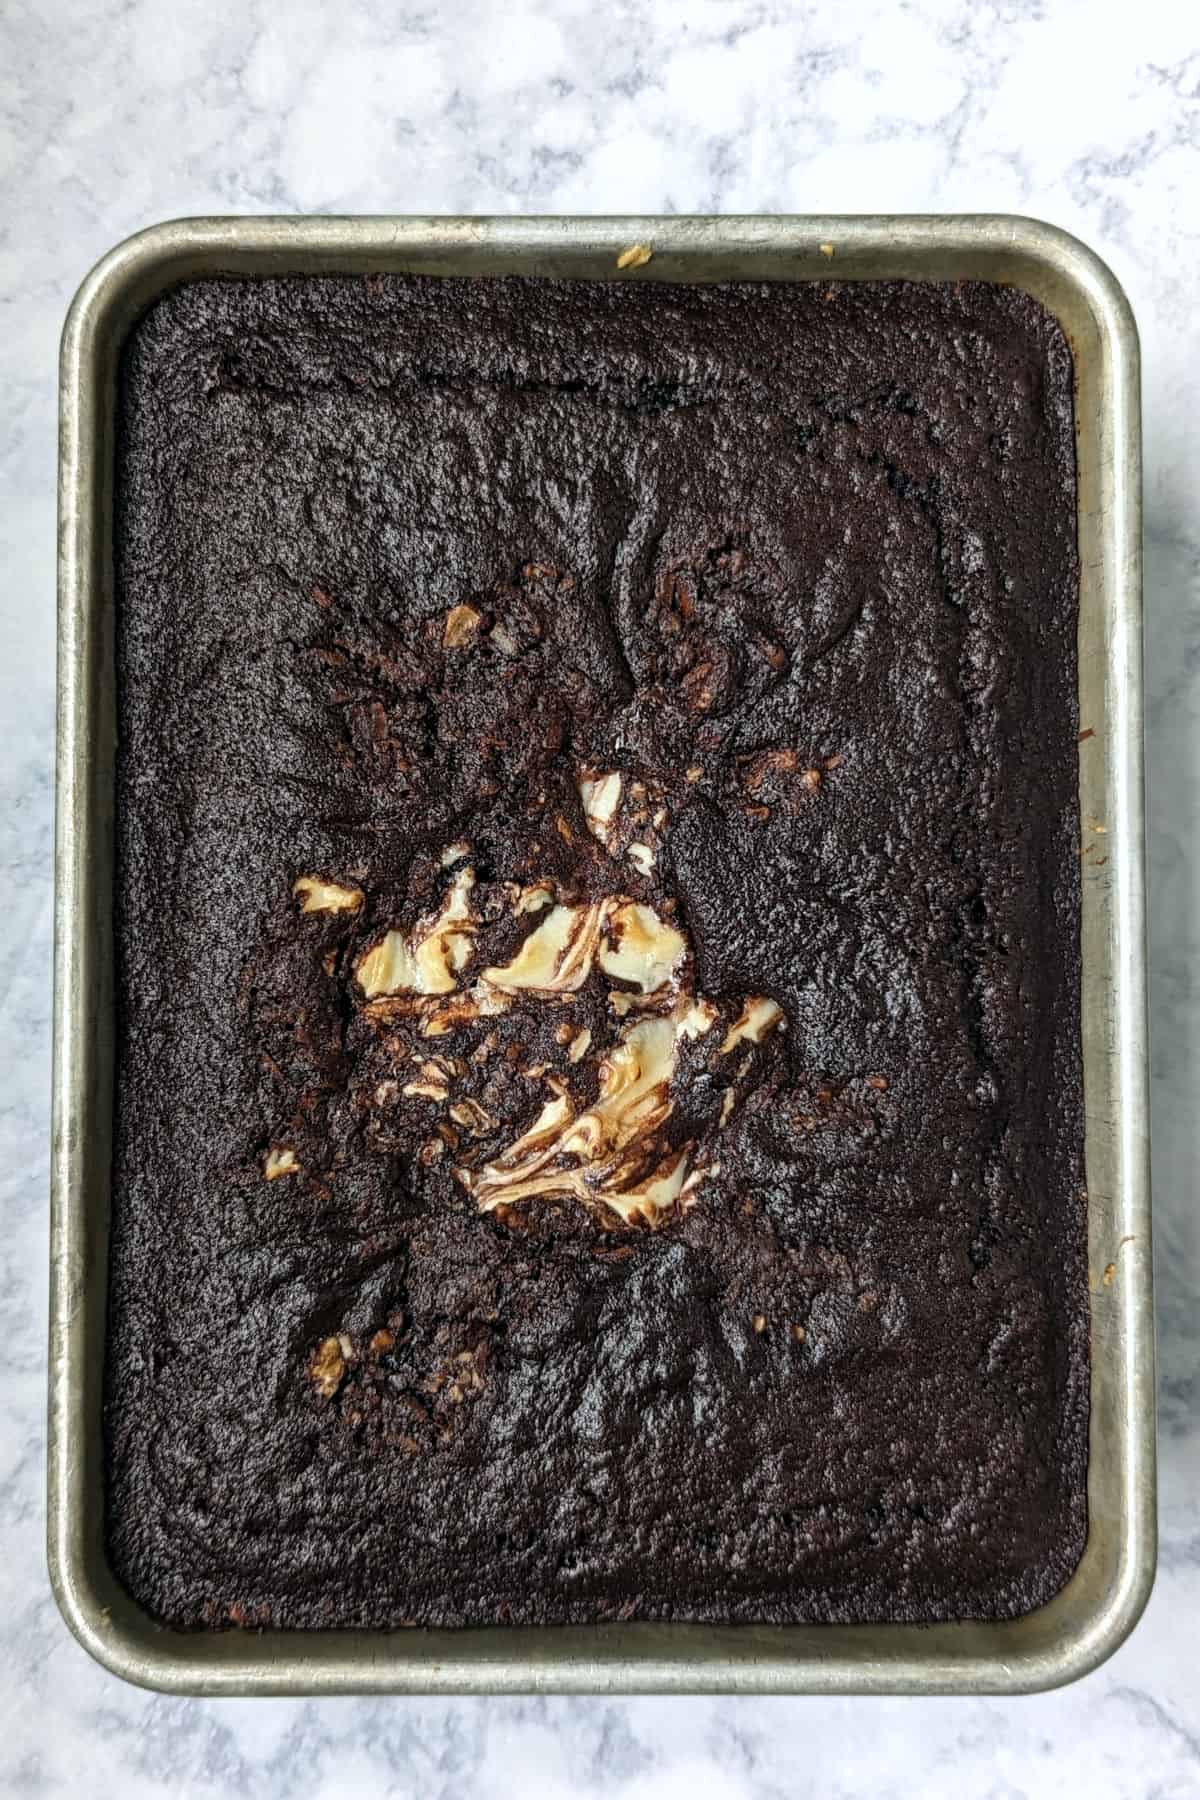 earthquake cake in a pan after being baked